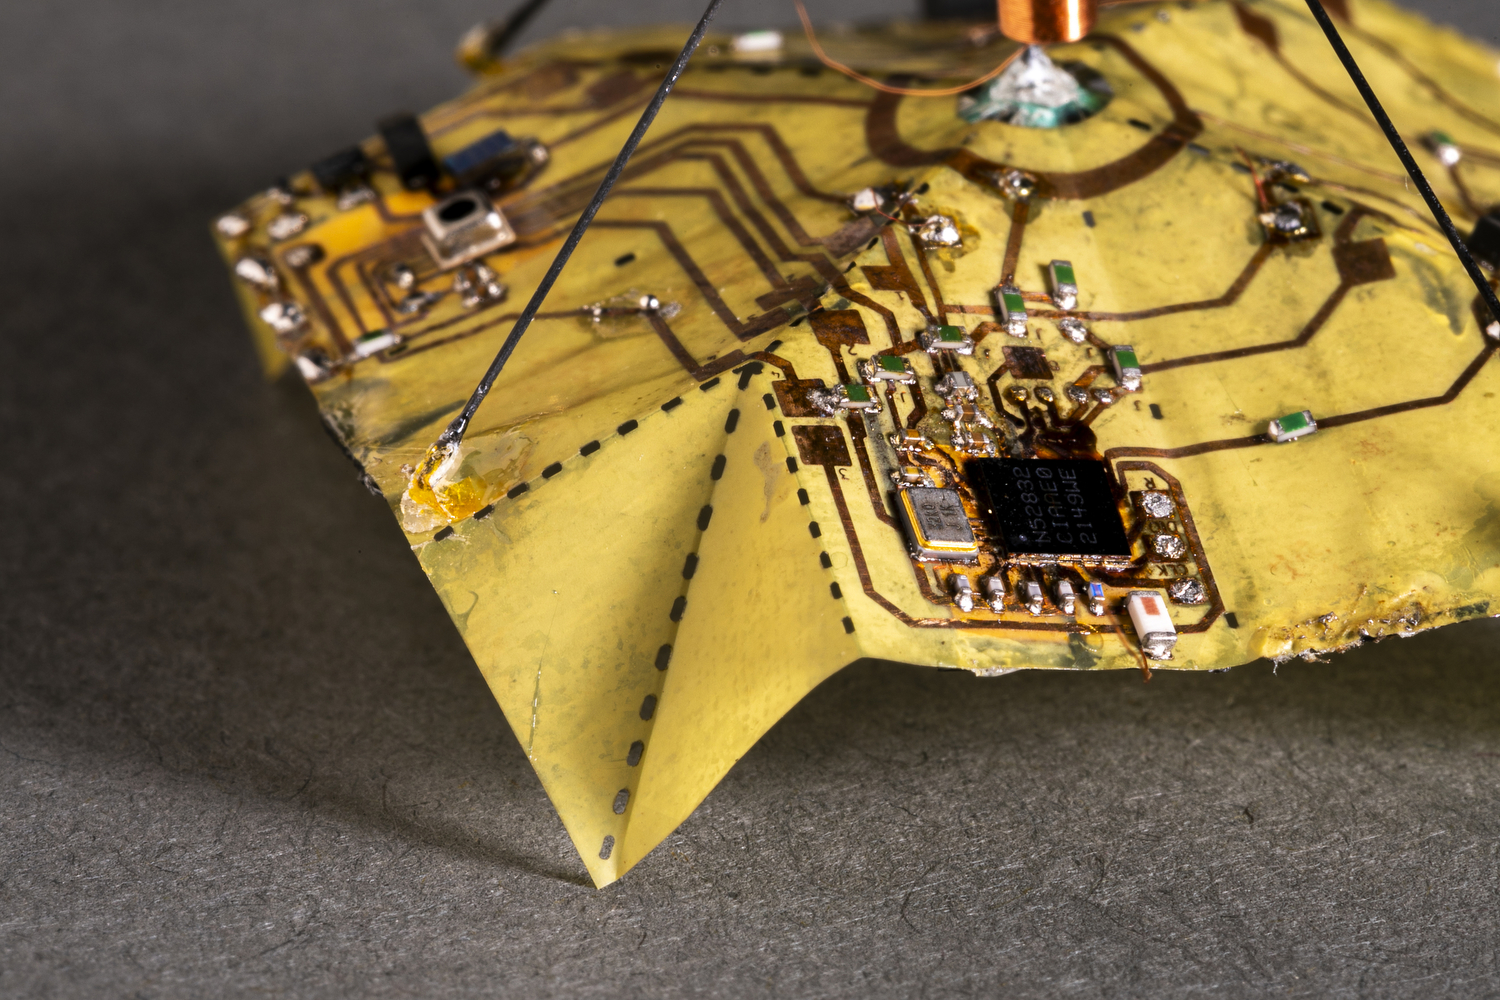 A close-up photo of a yellow device. The corner is folded and there are circuits patterned directly onto the material